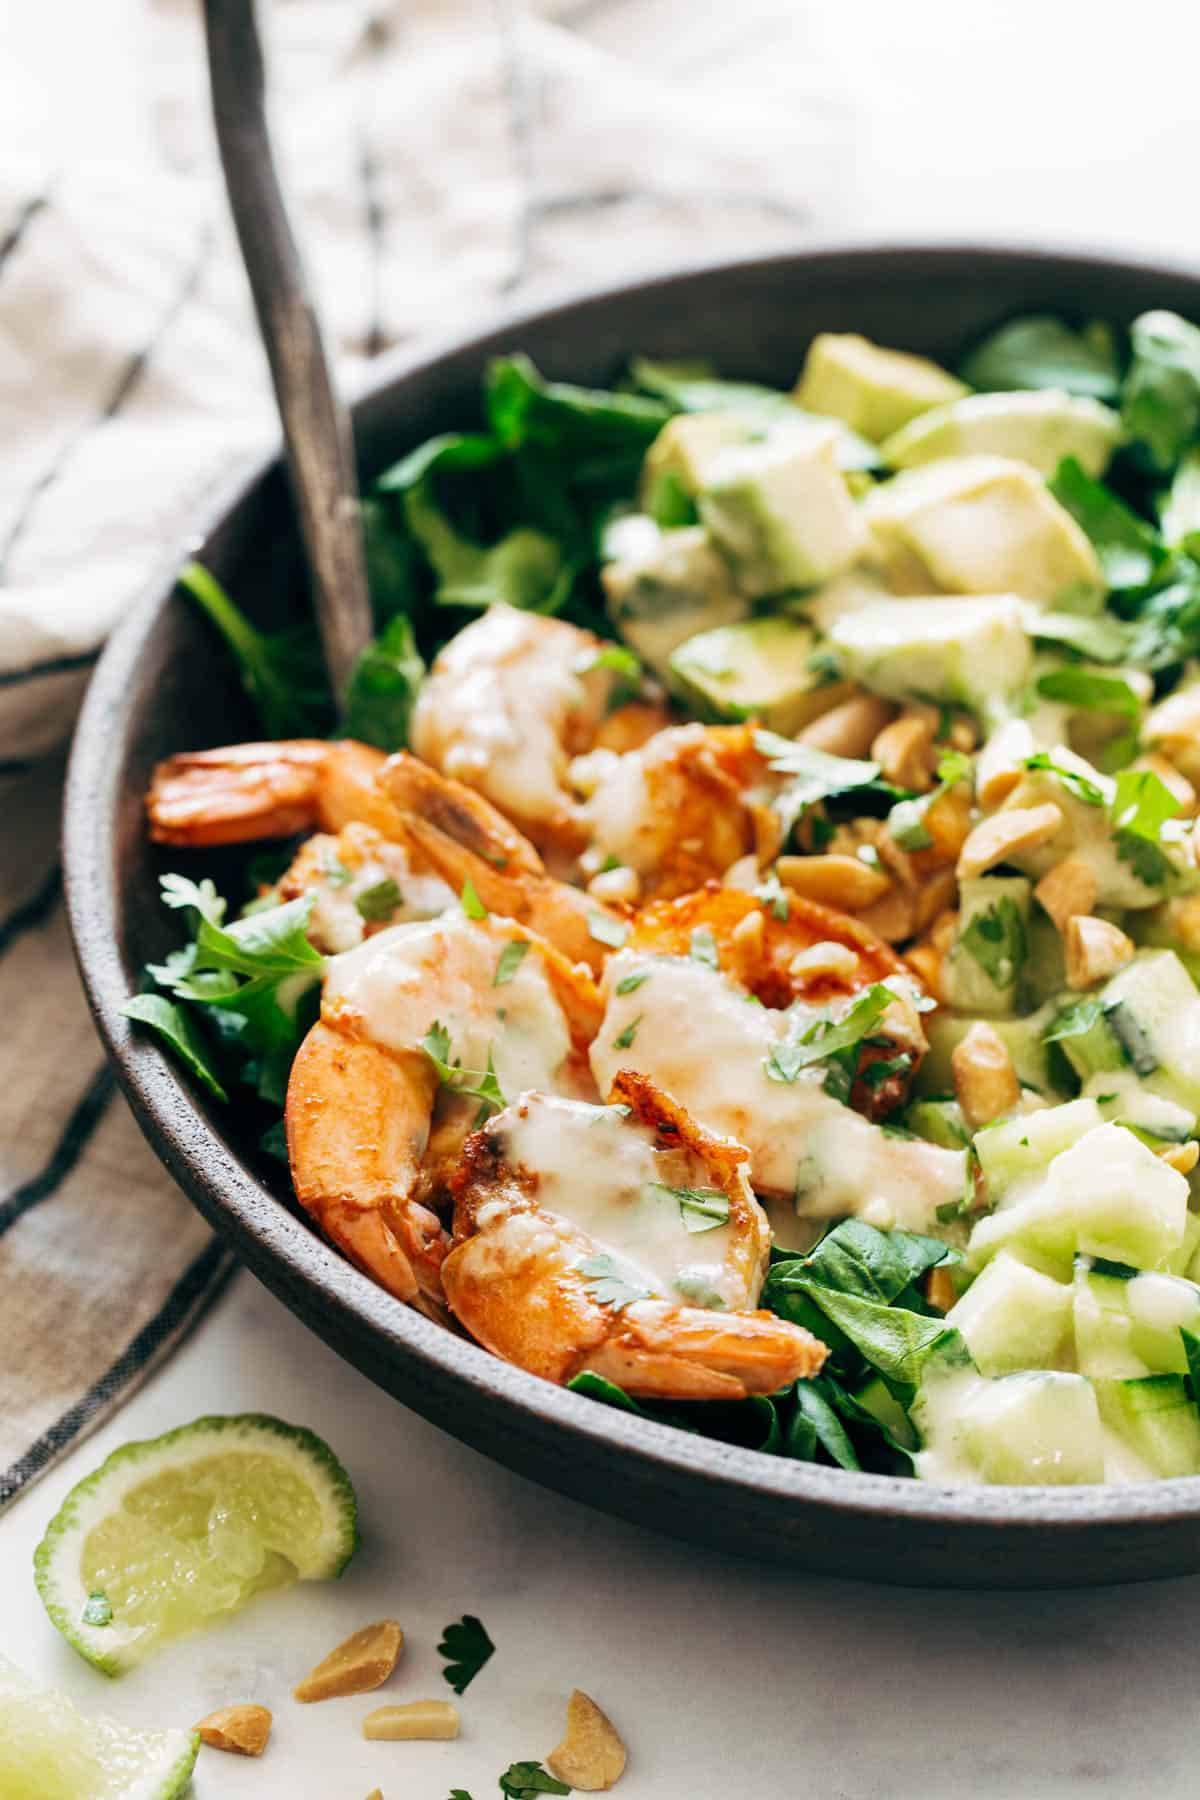 Close-up of Shrimp and Avocado Salad with Miso Dressing in a bowl.